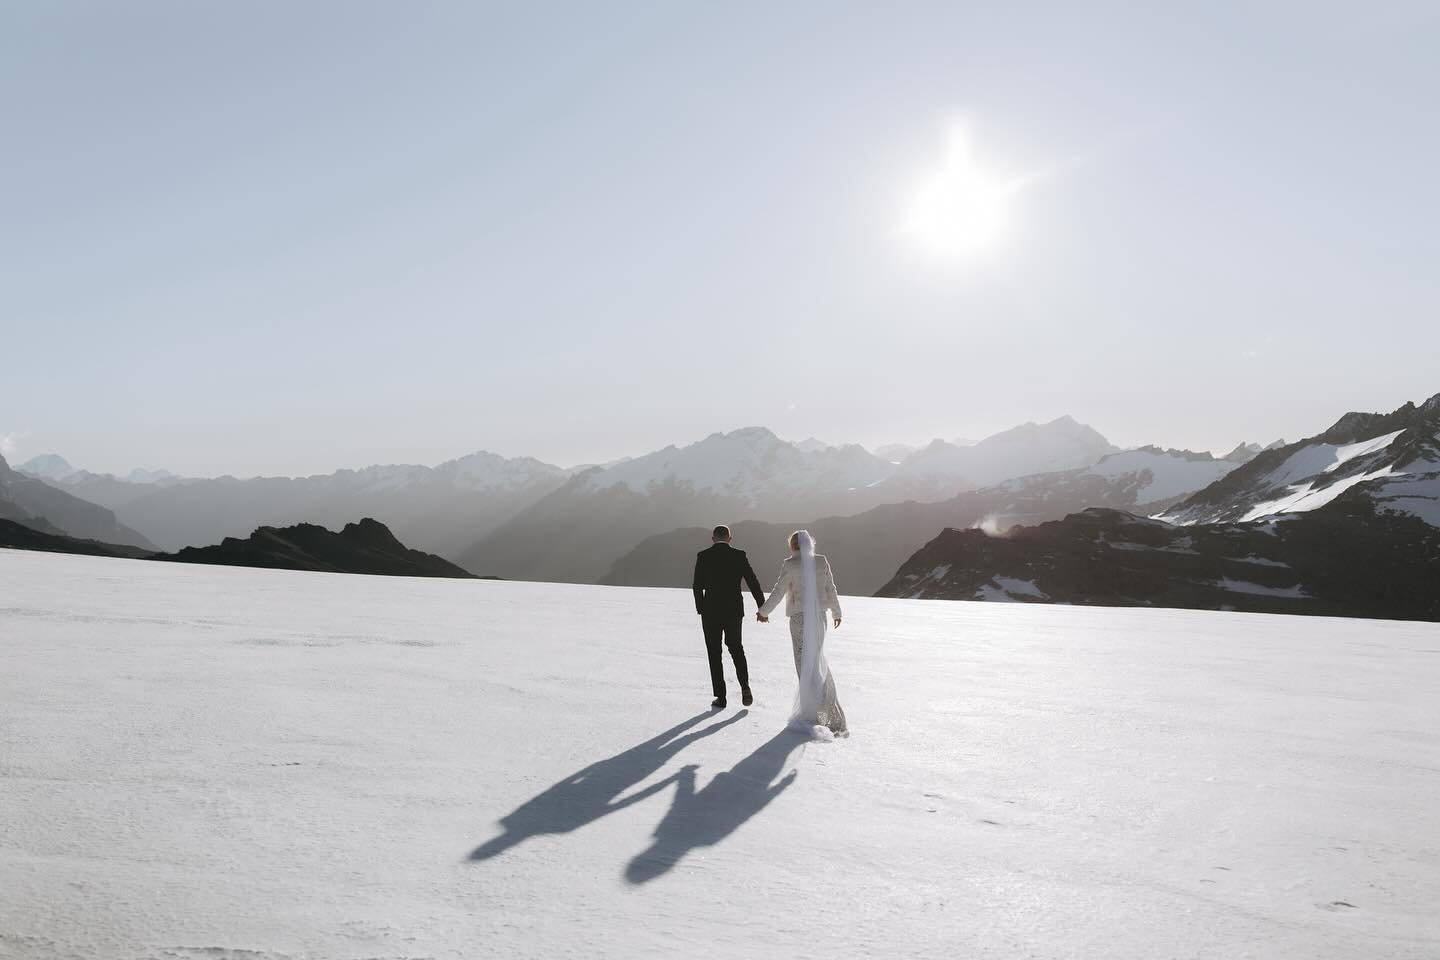 Dreaming of those glacier sunsets and a big thank you to @marriedbyjake for the little bts video (see slide 2). The glow off the ice was something else ❄️🤍

Photography @jessicaturich 
Celebrant @marriedbyjake 
Helicopter @aspiringheli 
Video @eurek